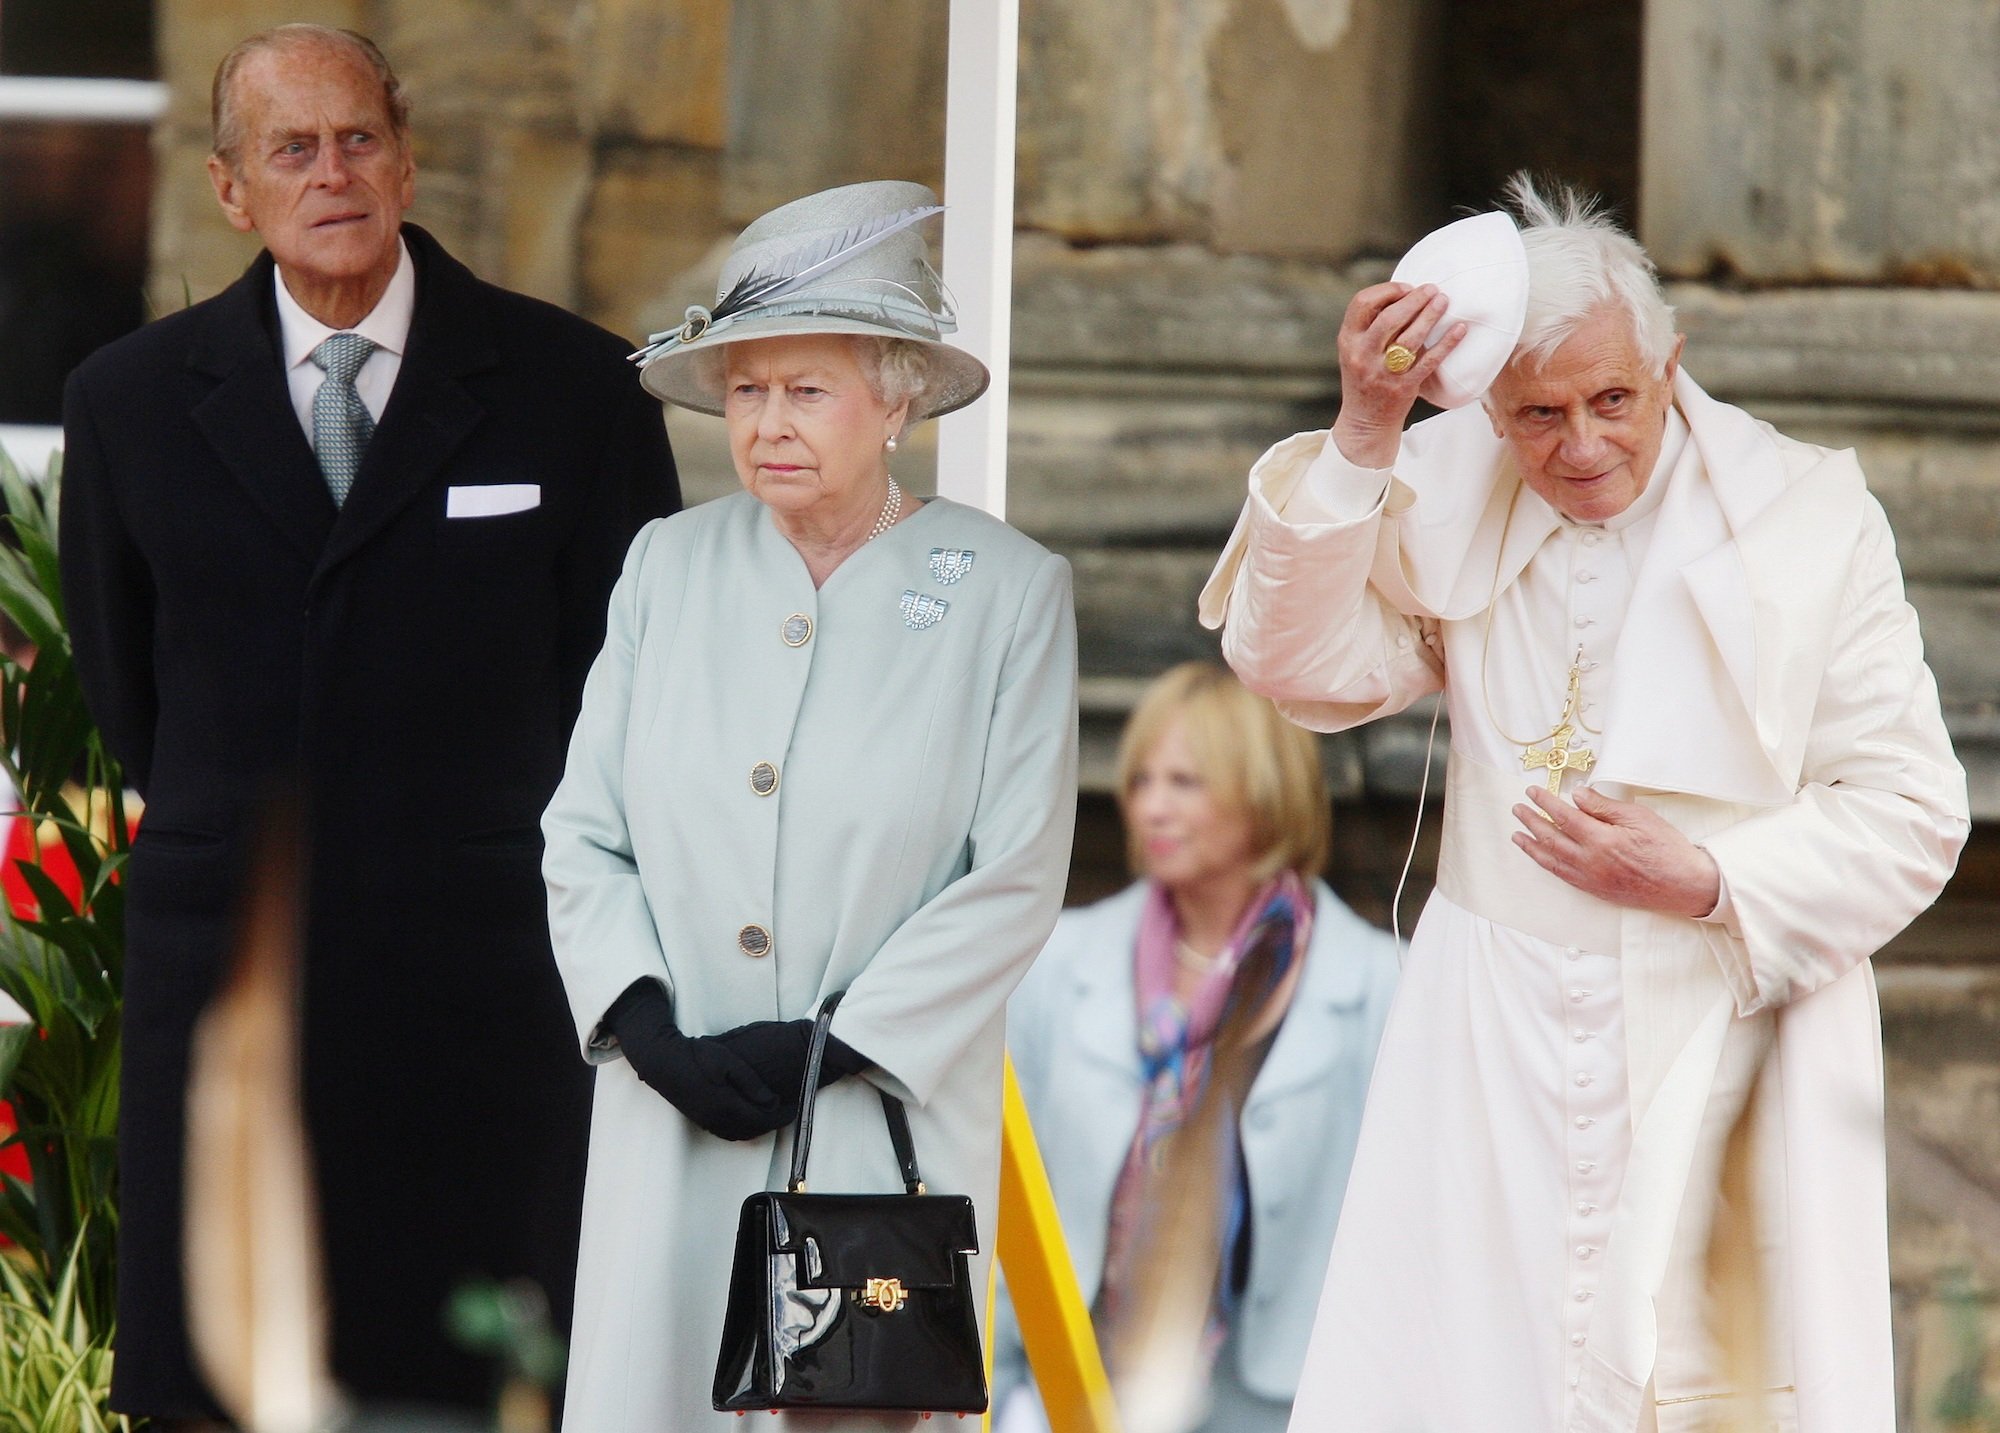 What Religion Is the Royal Family? Queen Elizabeth, Prince William, and Other Royal Family Members’ Religious Beliefs